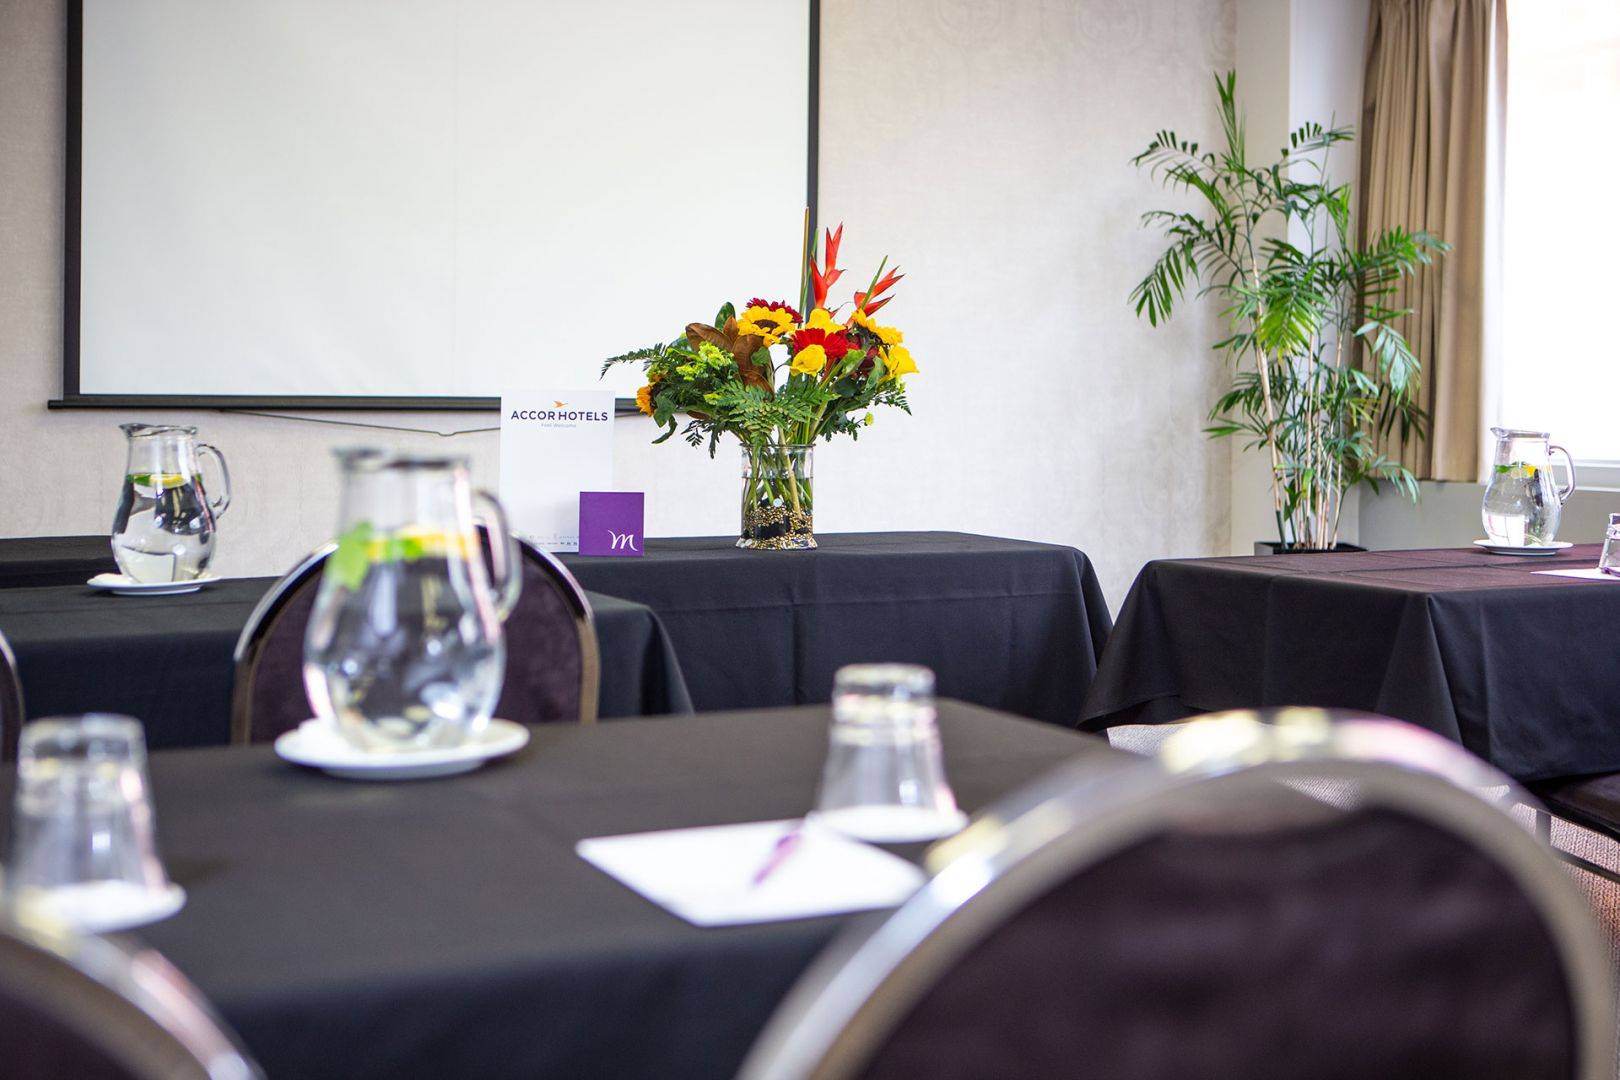 Interiors of the Abel Tasman Meeting Room with small tables with chairs facing a projector screen on the wall